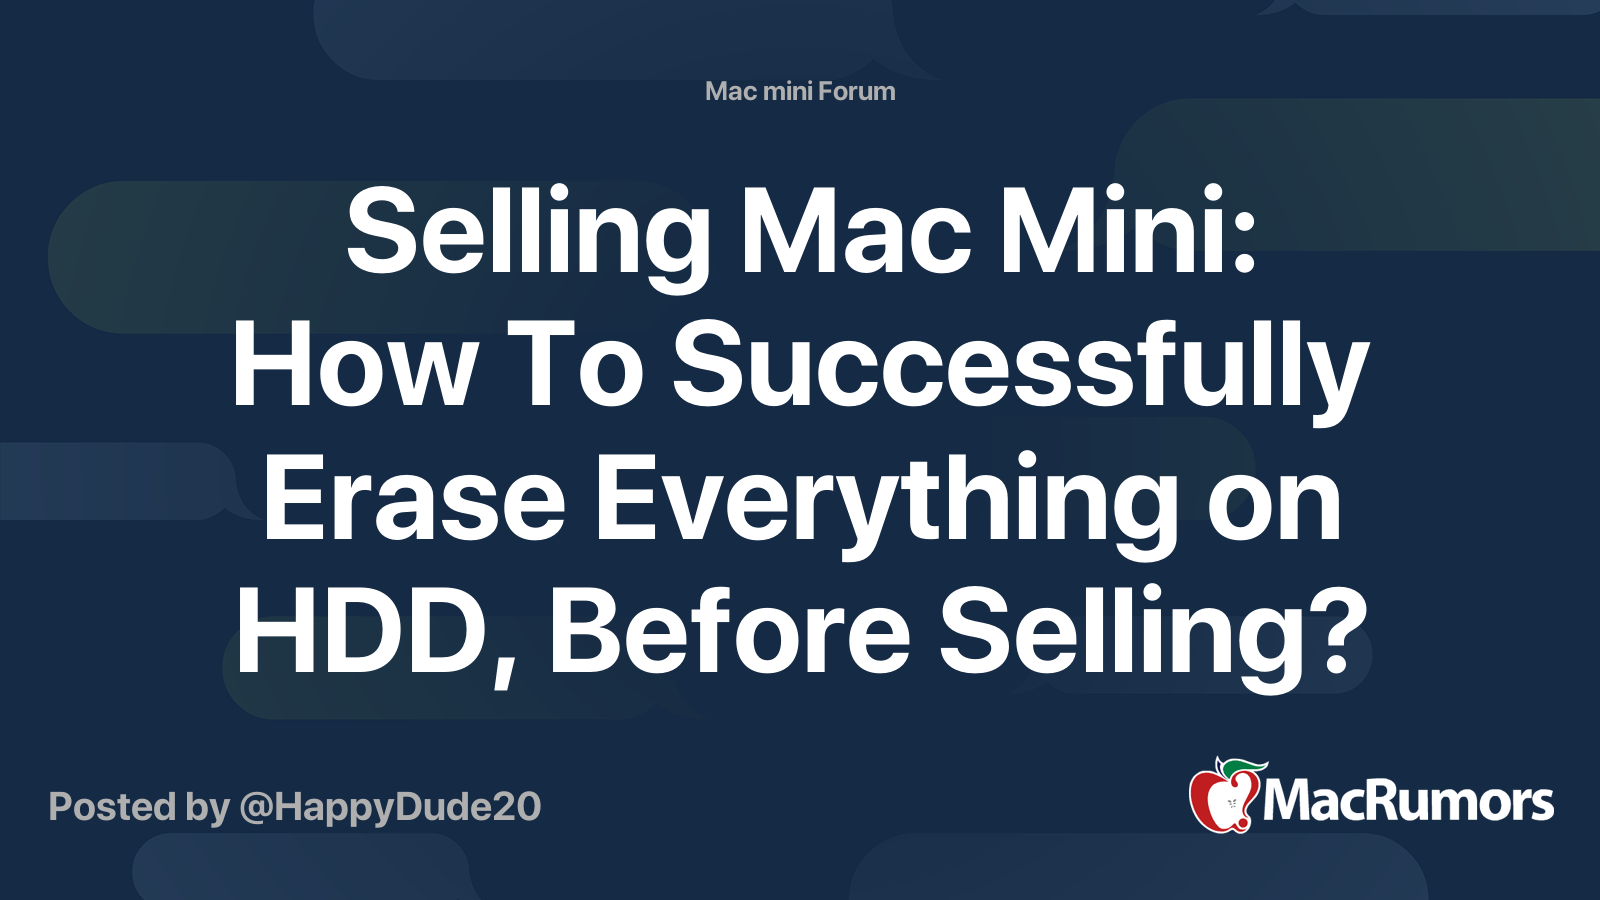 Selling Mac Mini: How To Successfully Erase Everything on HDD, Before